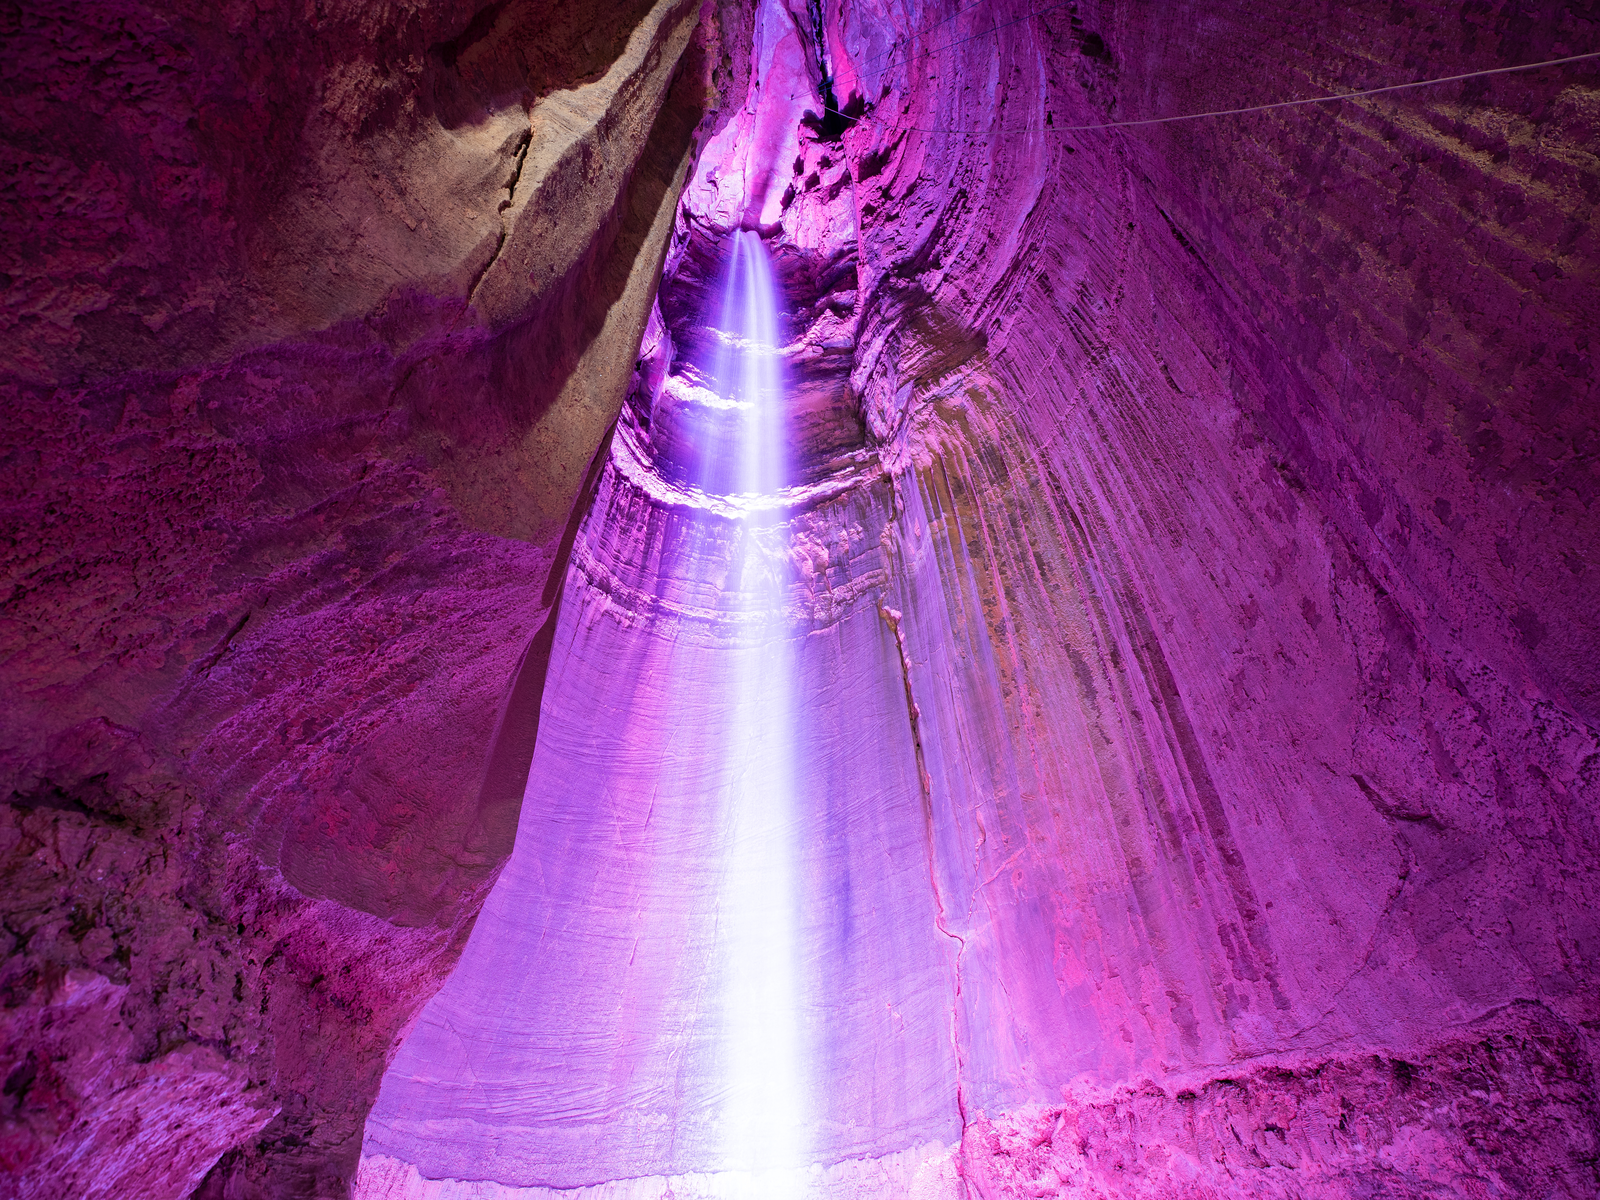 Surreal Ruby Falls, one of the best places to visit in Tennessee, a waterfall in a cave